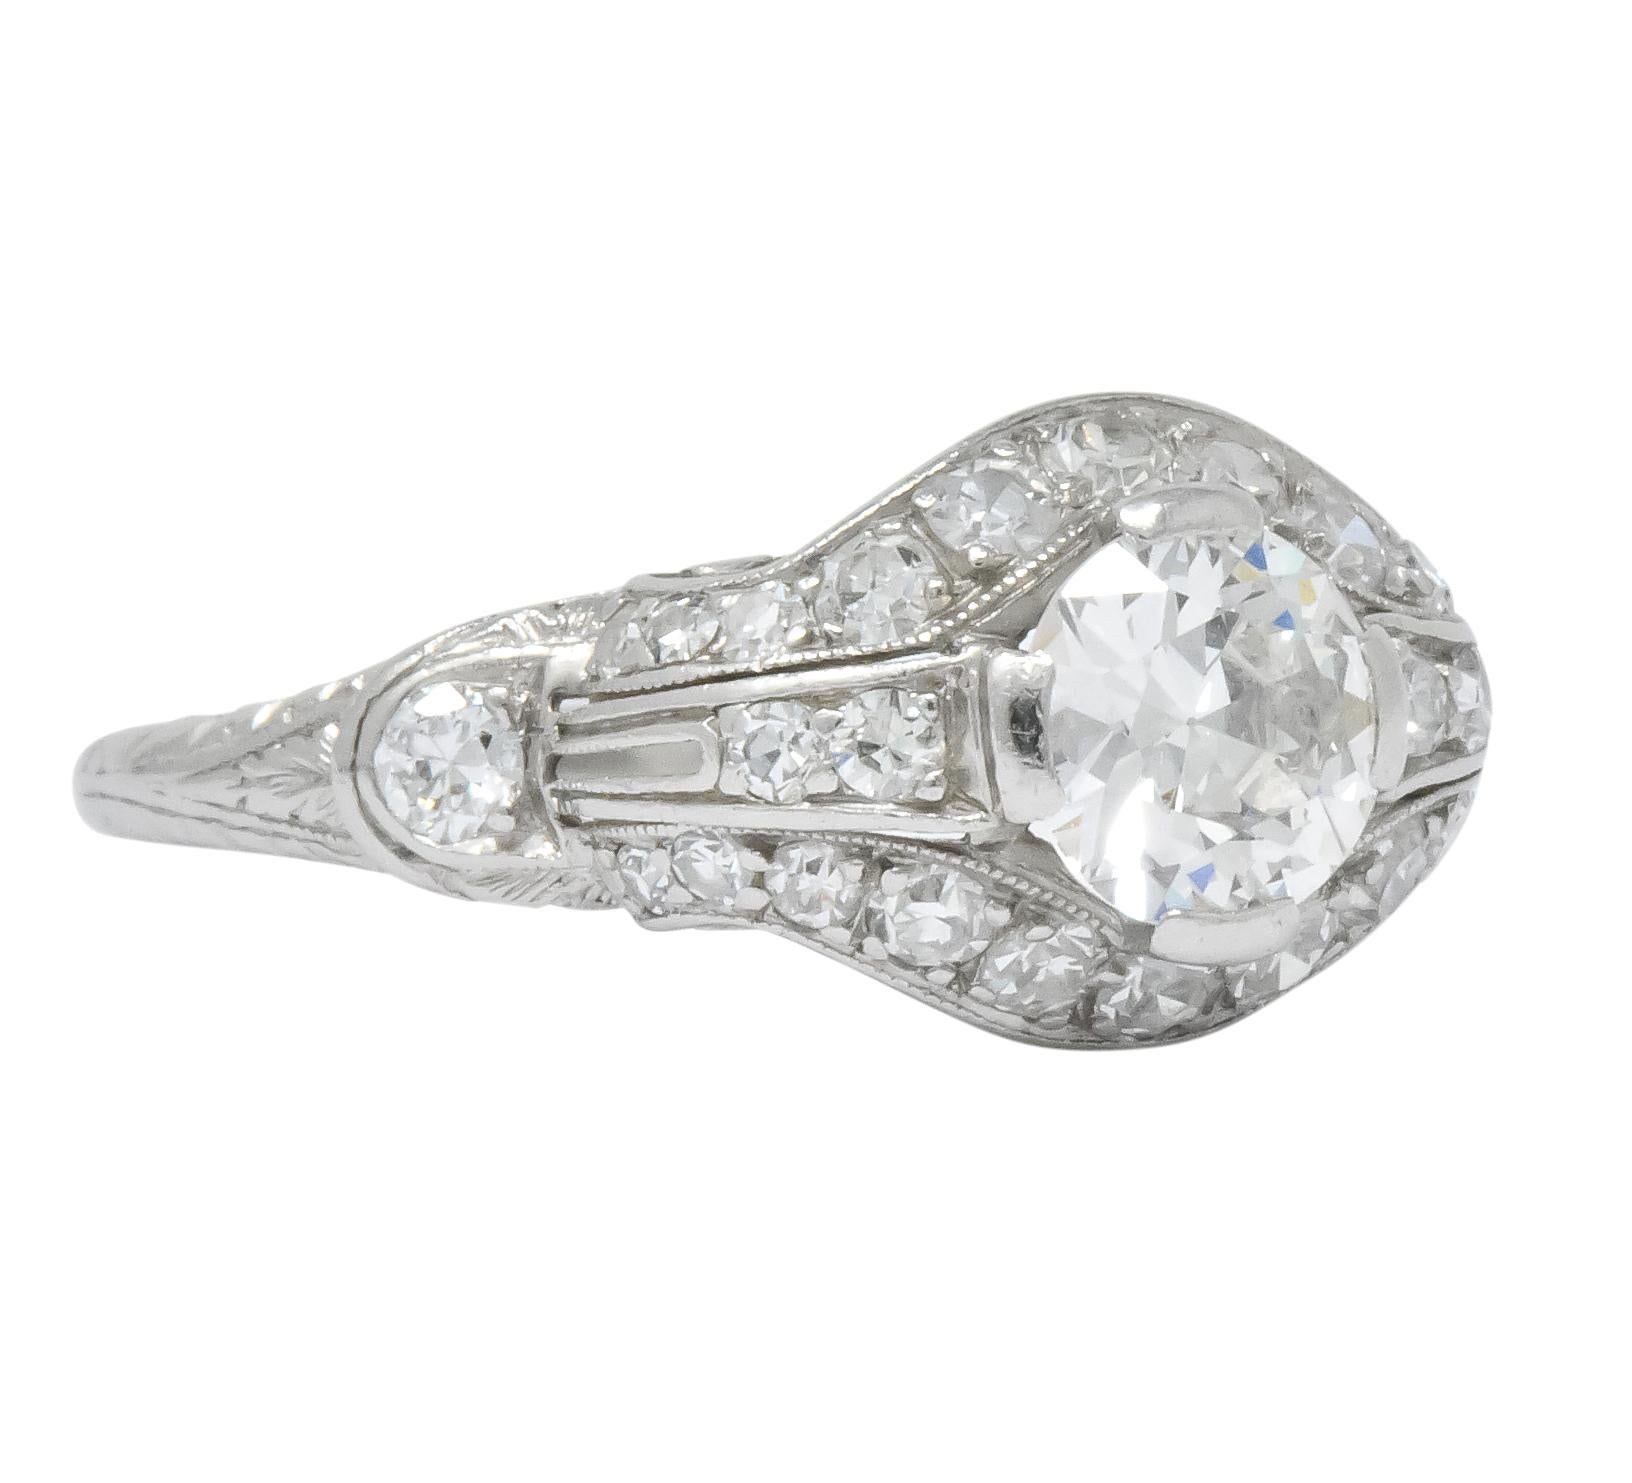 Centering a transitional cut diamond weighing approximately 0.60 carat, H color and VS clarity

Surrounded by single cut diamonds with two transitional cut diamonds at the shoulders, all weighing approximately 0.20 carat, H/I color and VS